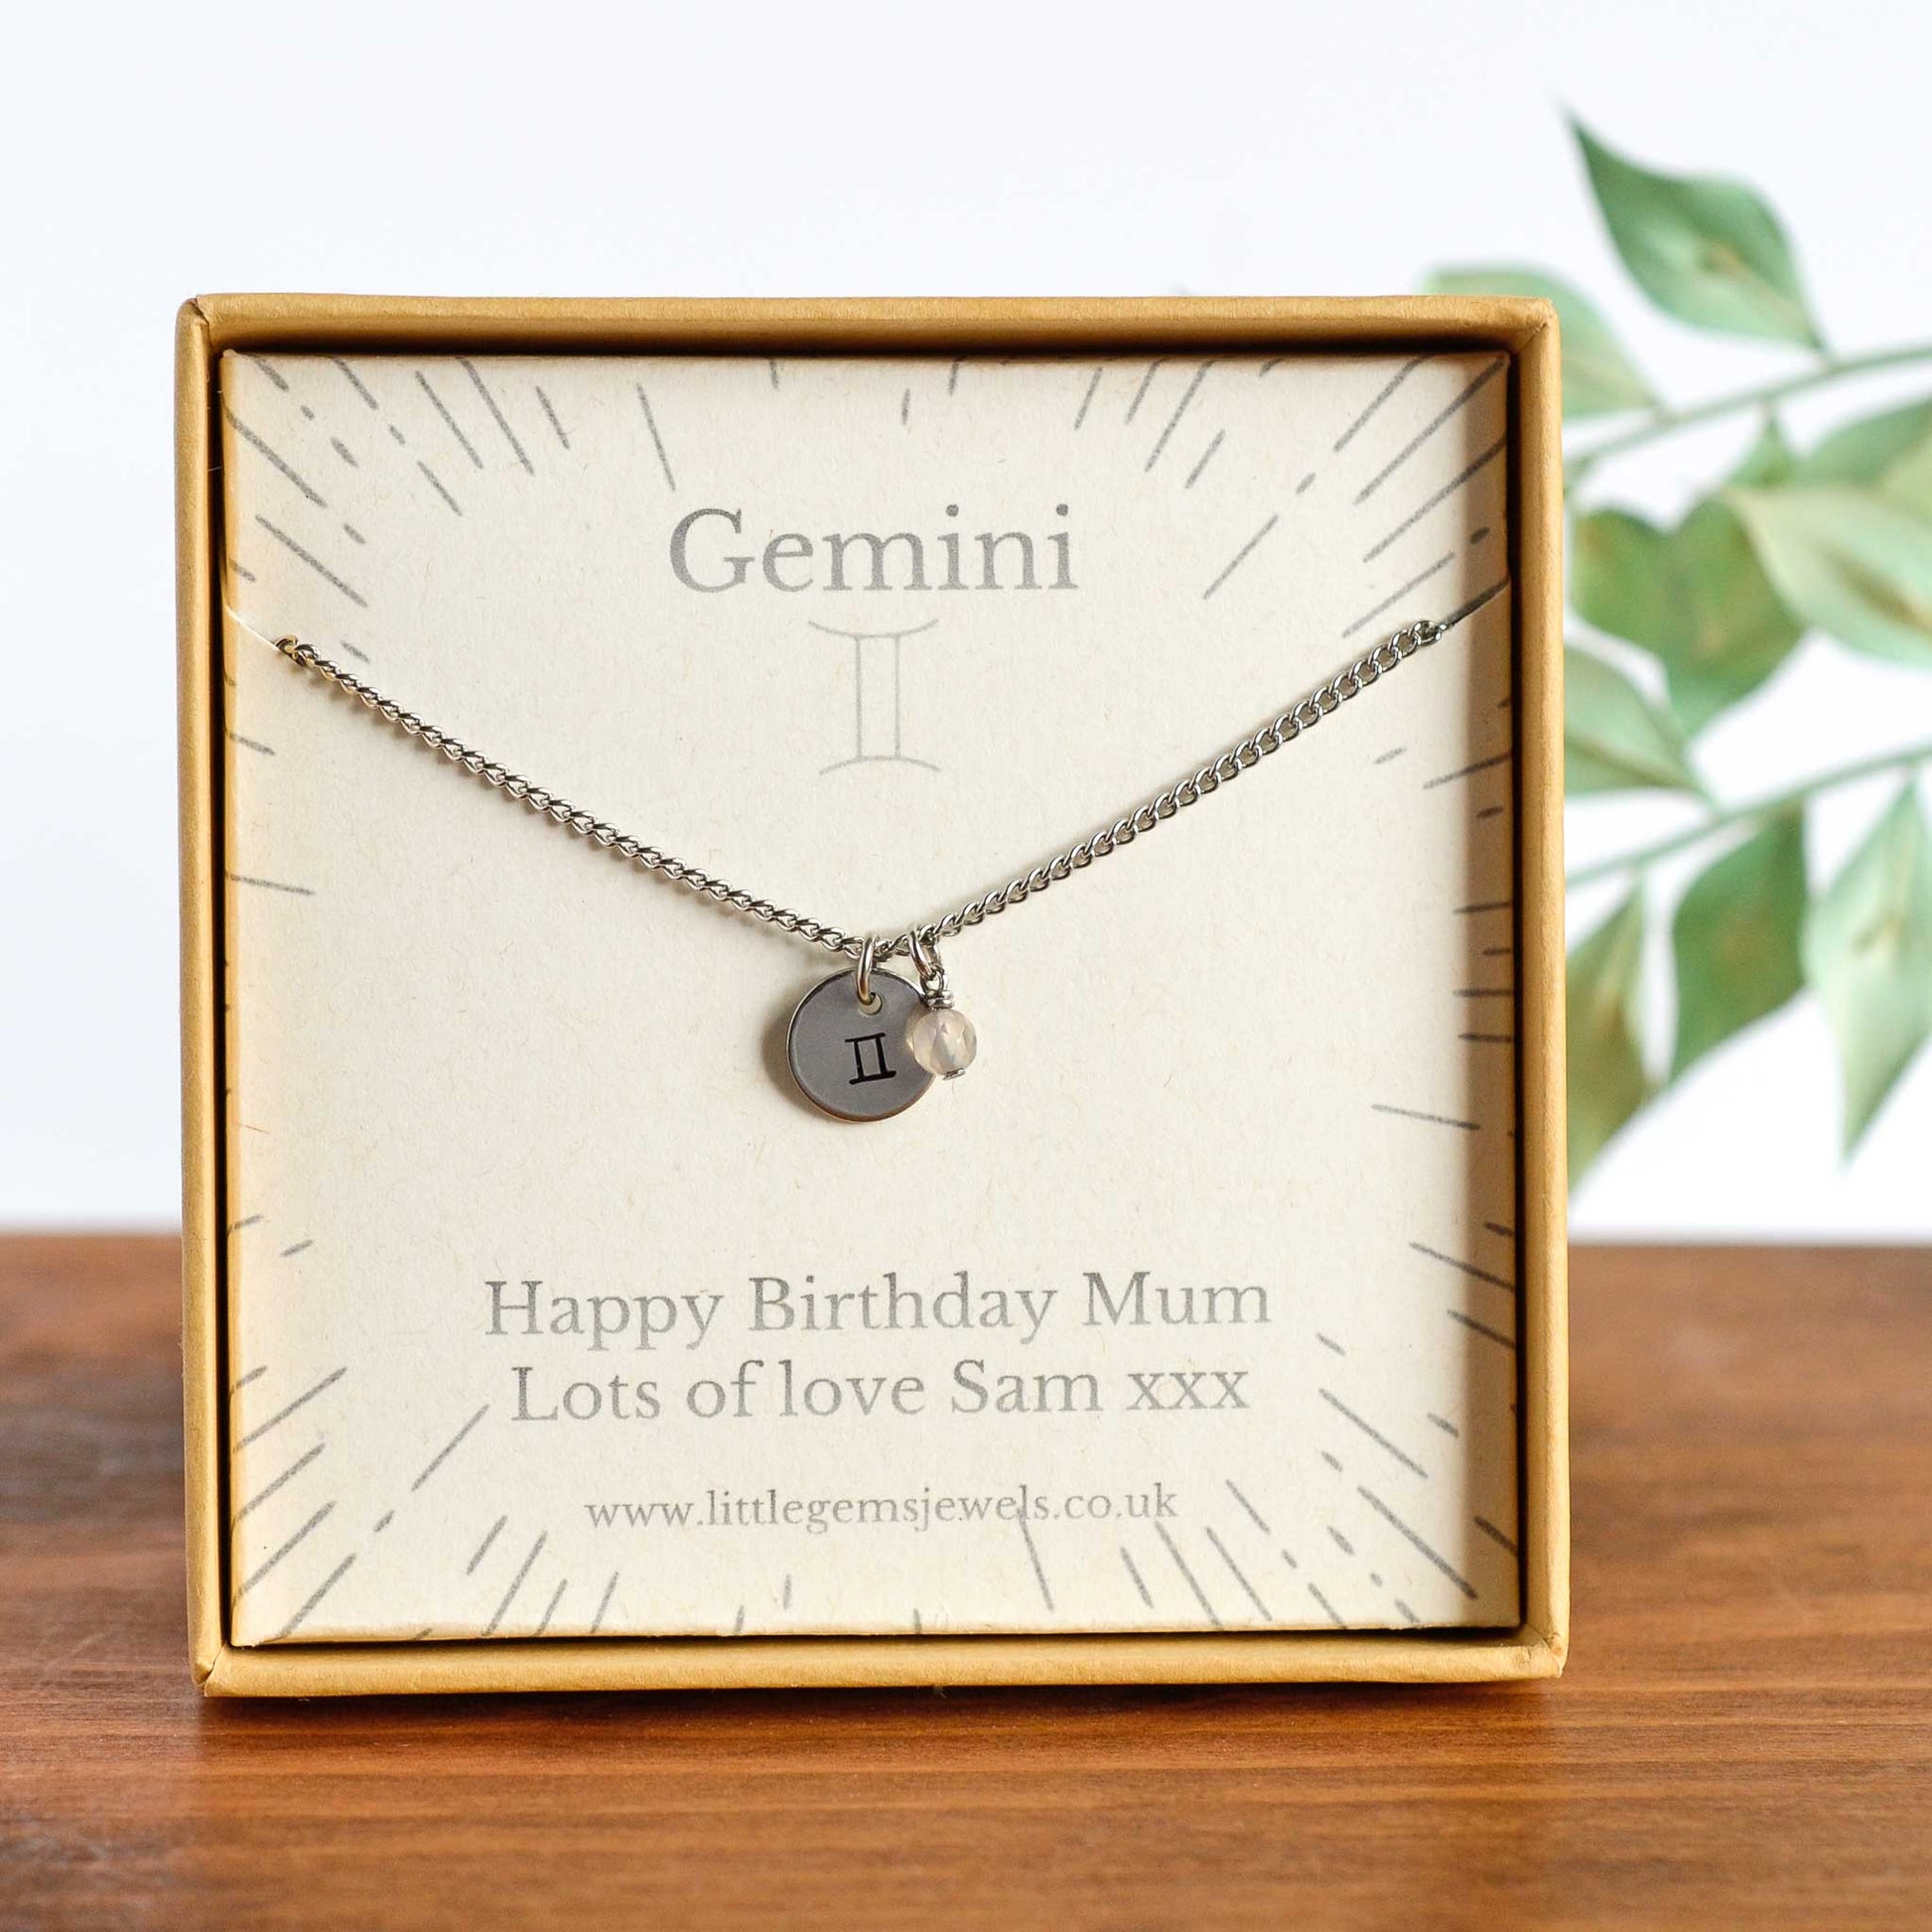 Gemini Zodiac necklace with personalised gift message in eco friendly gift box